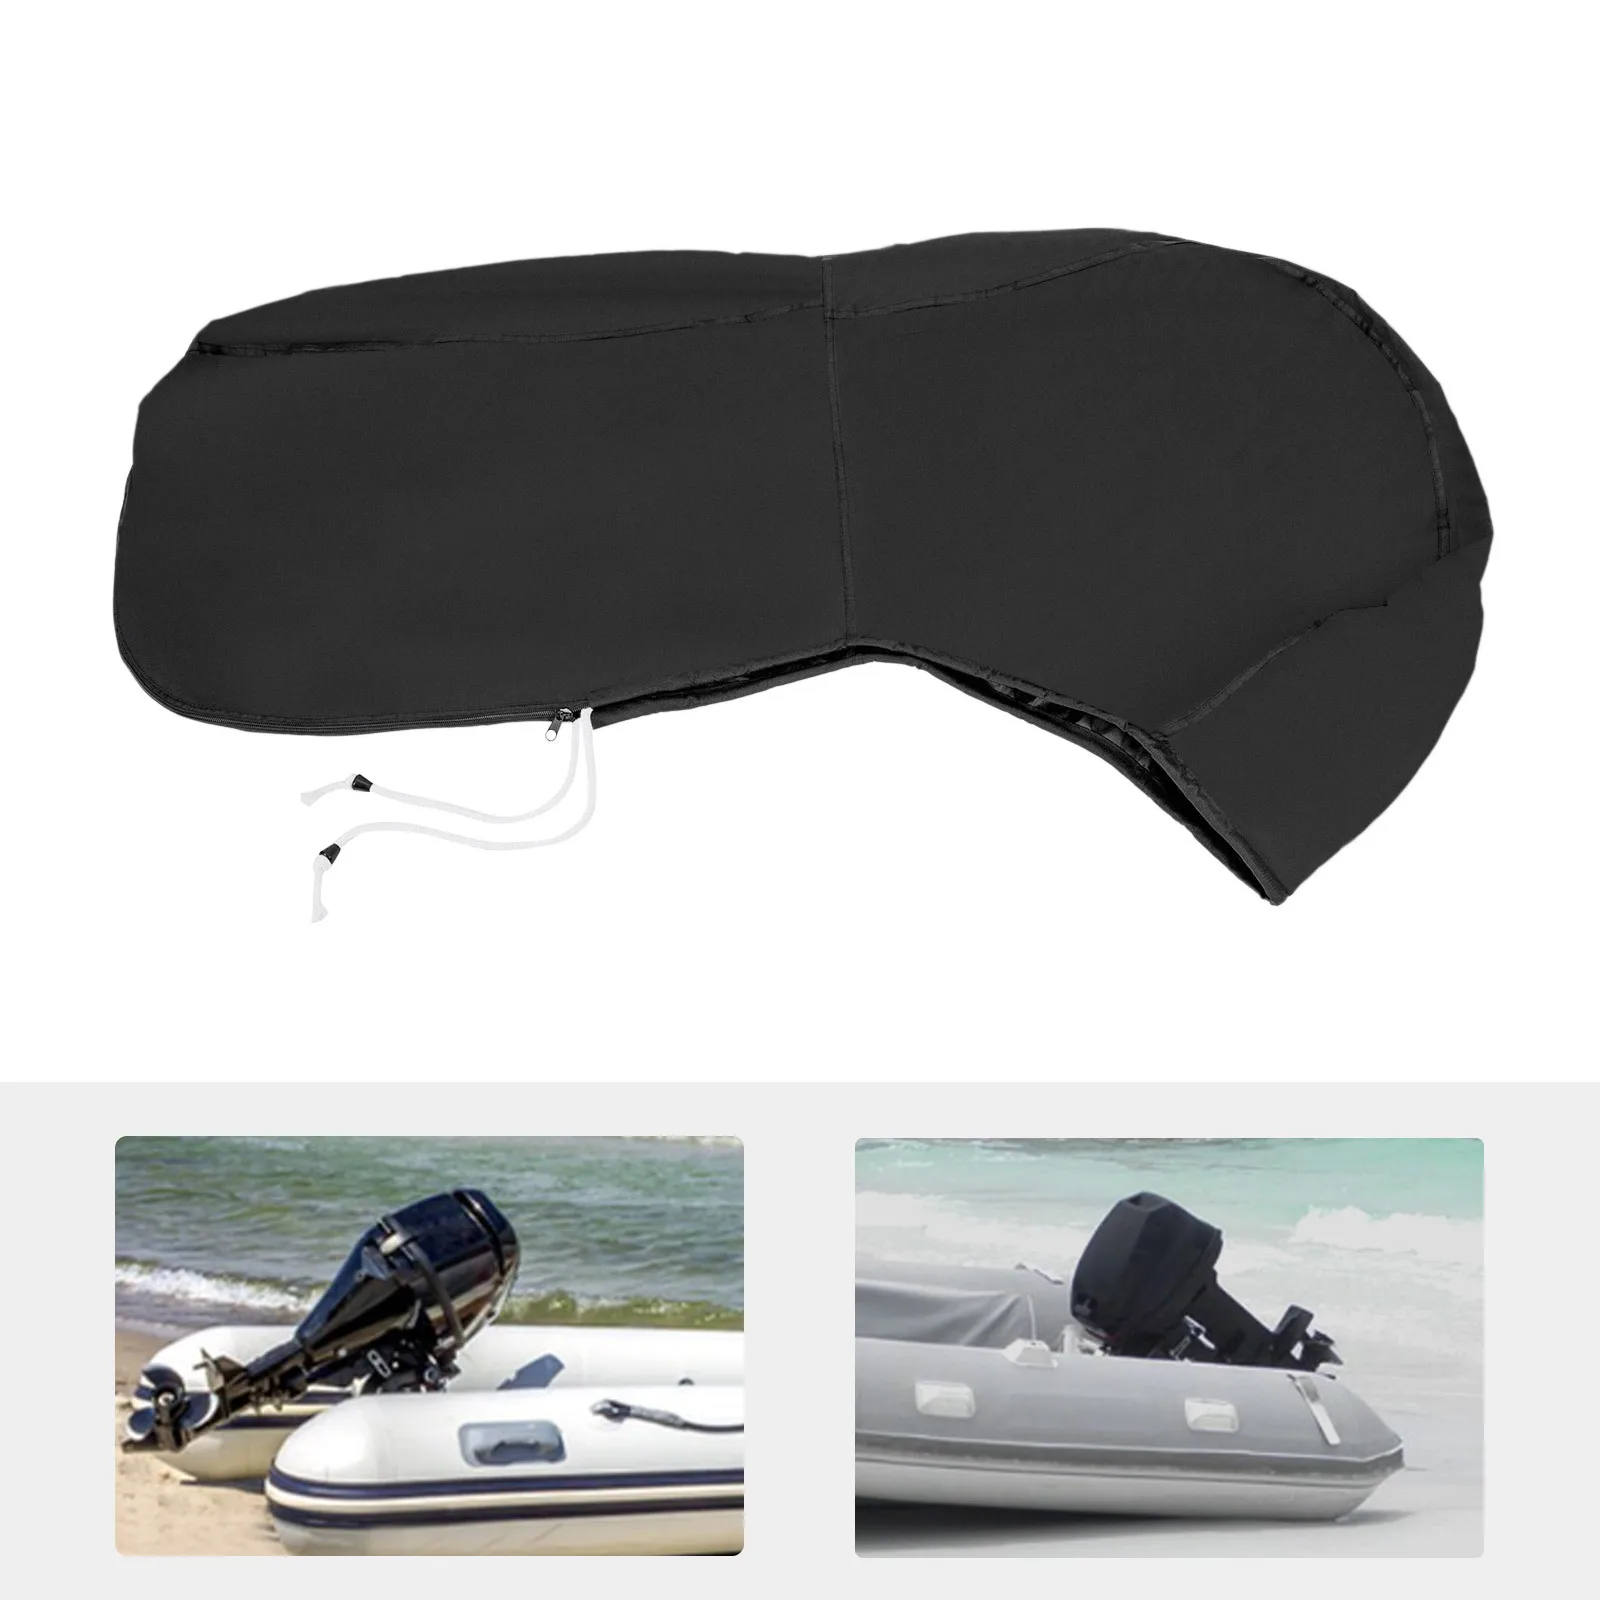 600D Oxford Cloth Waterproof Motor Full Outboard Boat Engine Cover with a Zippered Storage Bagfor 6-15HP Black Heat-resistant пассивная акустика tannoy vx 15hp black